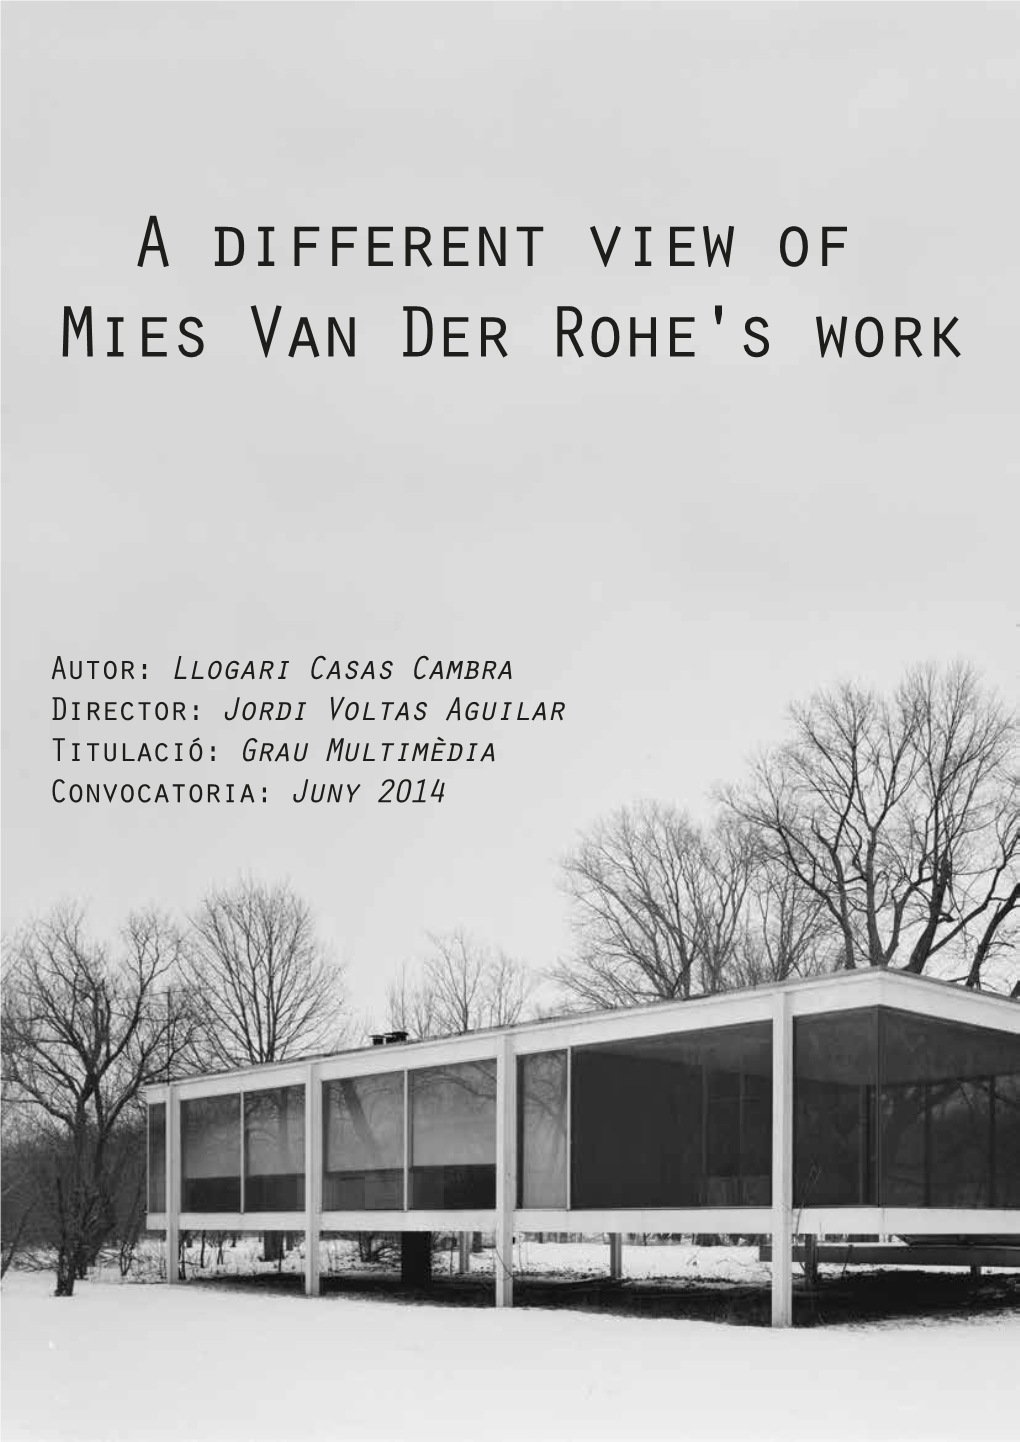 A Different View of Mies Van Der Rohe's Work